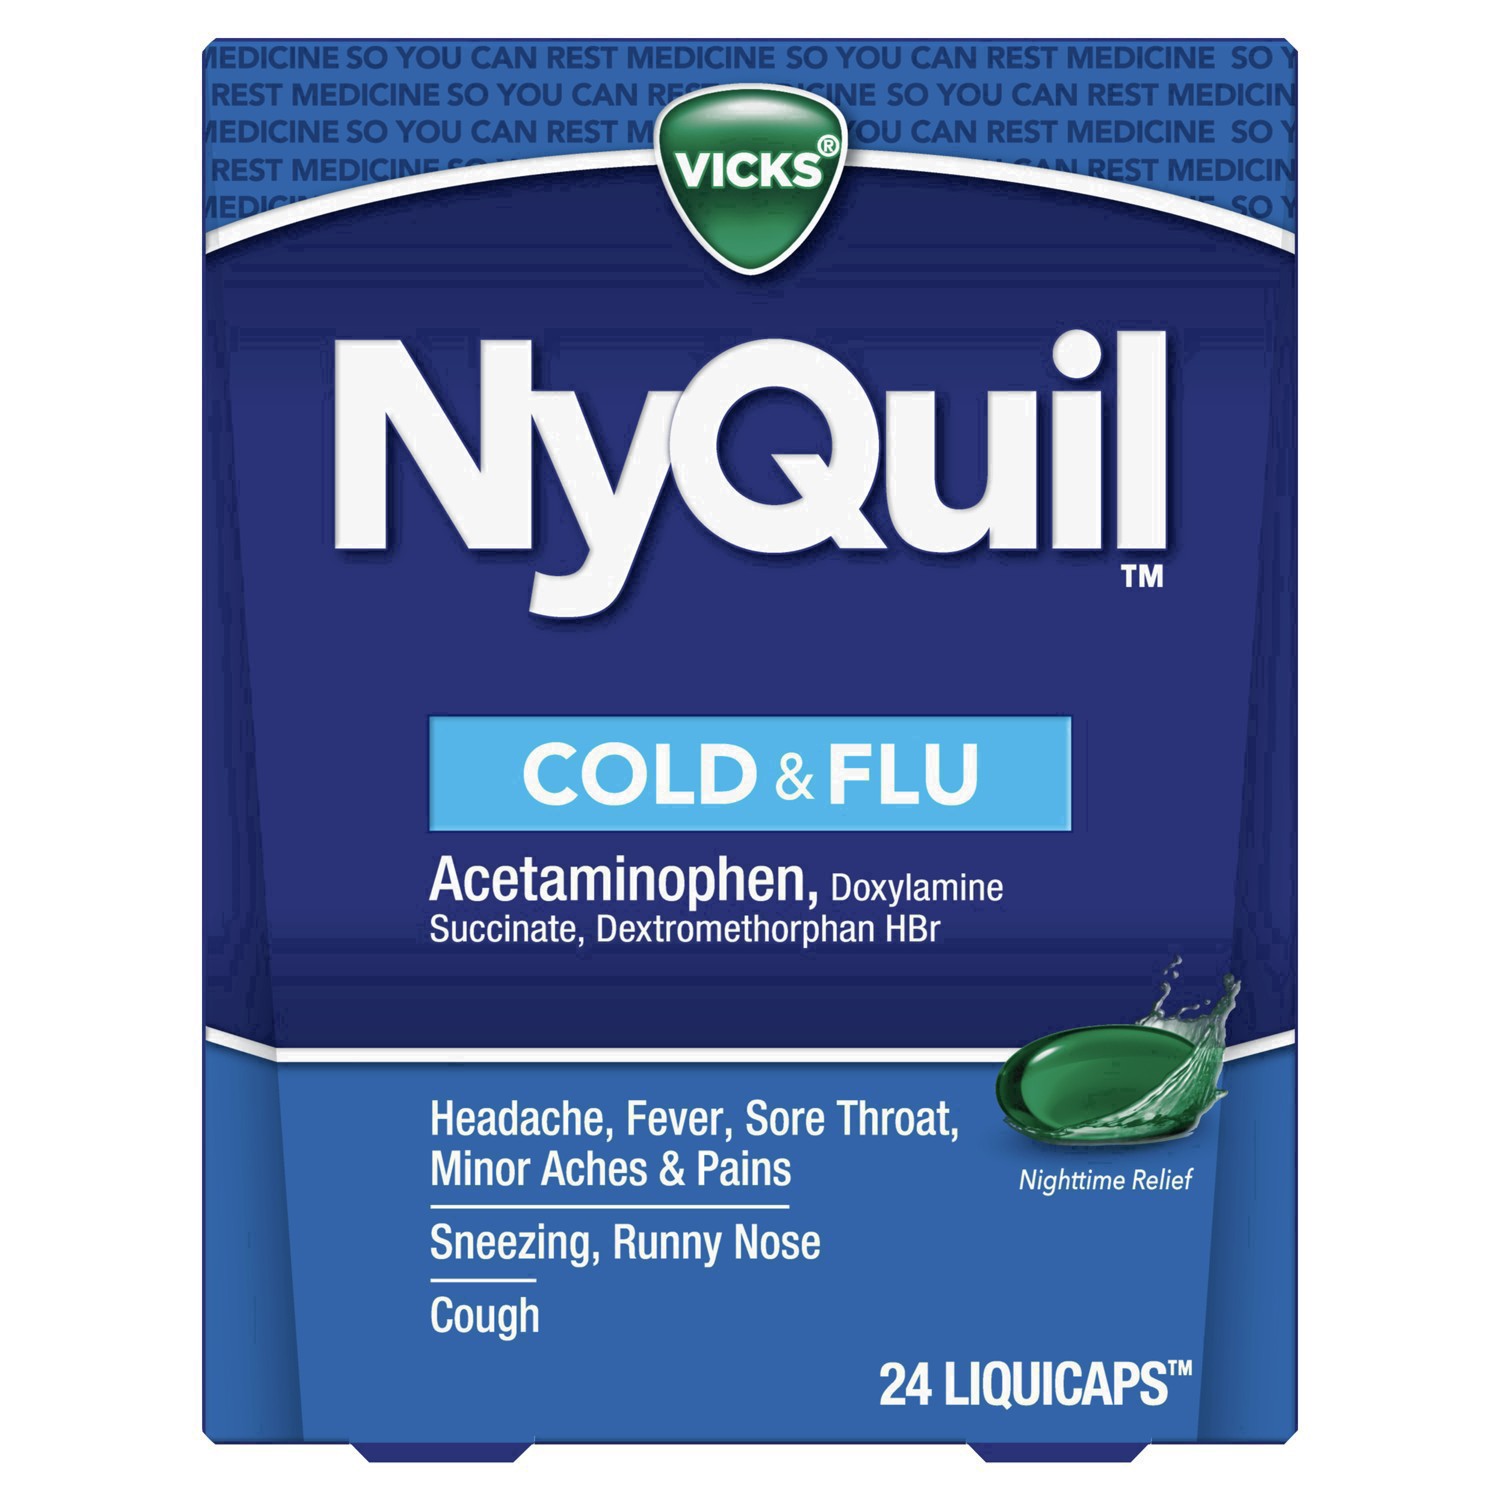 slide 34 of 68, NyQuil Vicks NyQuil Cold & Flu Medicine LiquiCaps - 24ct, 24 ct